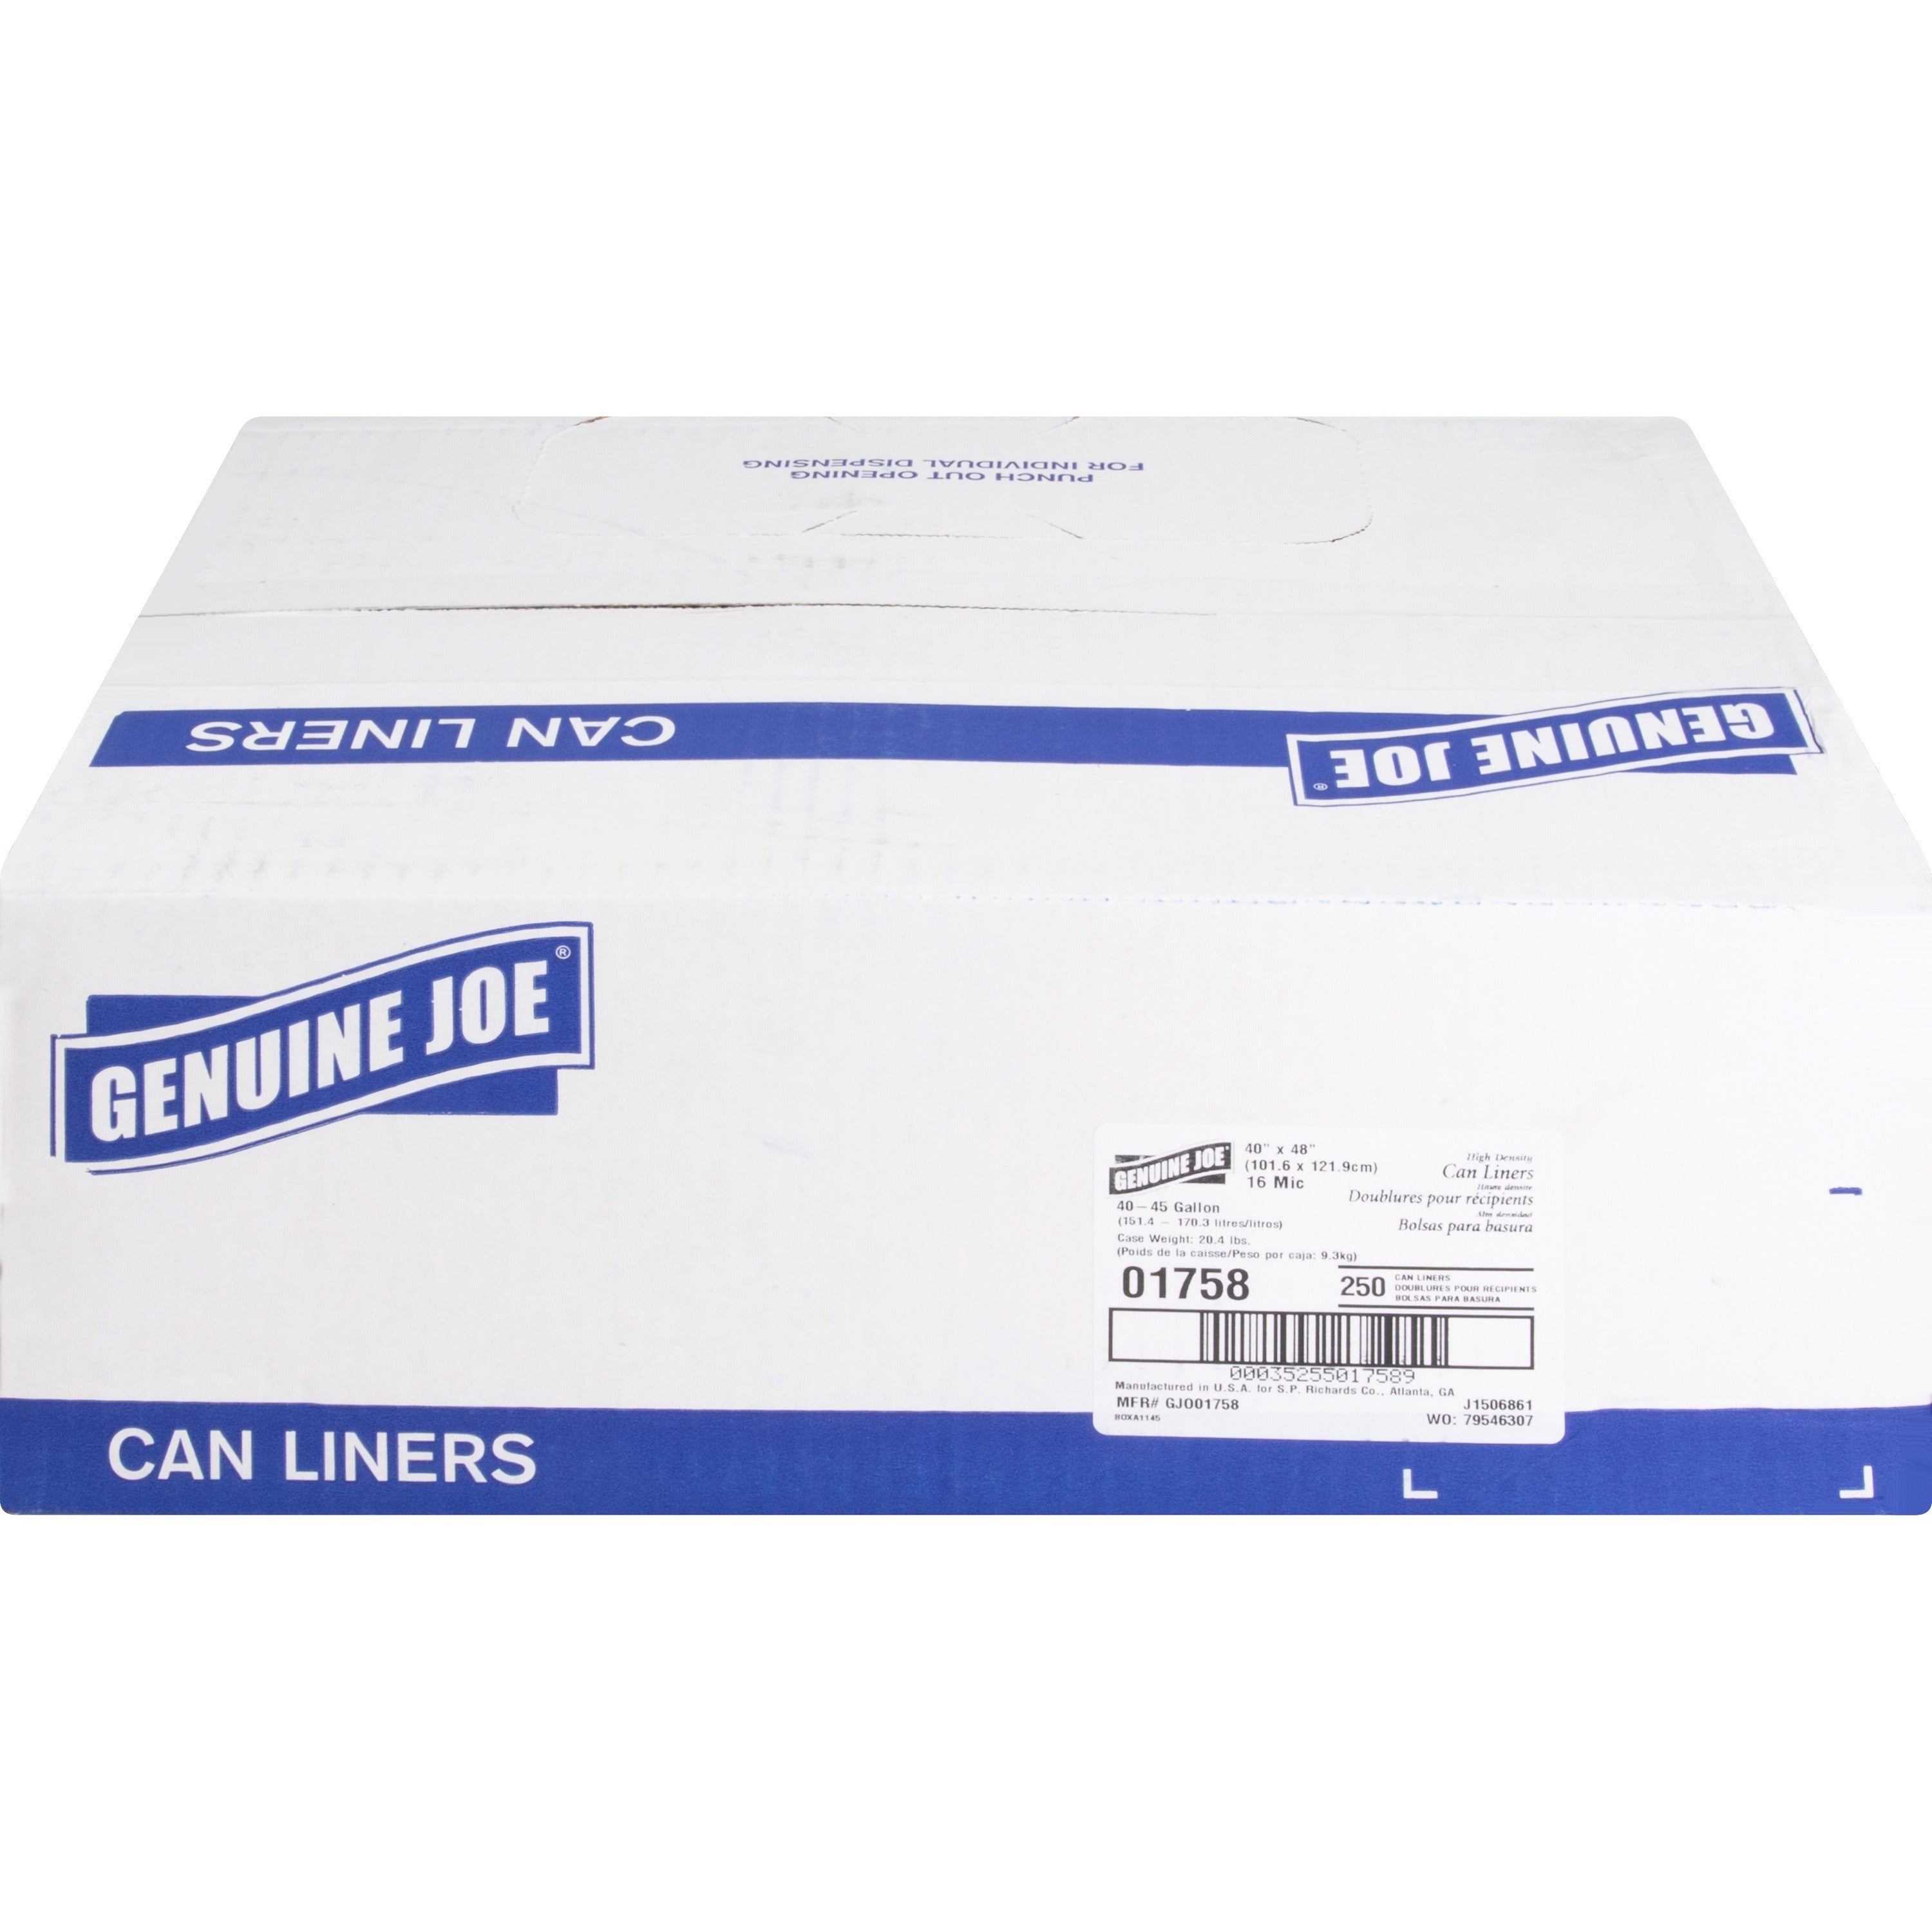 Genuine Joe High-density Can Liners - Large Size - 45 gal Capacity - 40" Width x 48" Length - 0.63 mil (16 Micron) Thickness - High Density - Clear - Resin - 10/Carton - 25 Per Roll - Office Waste, Industrial Trash - 